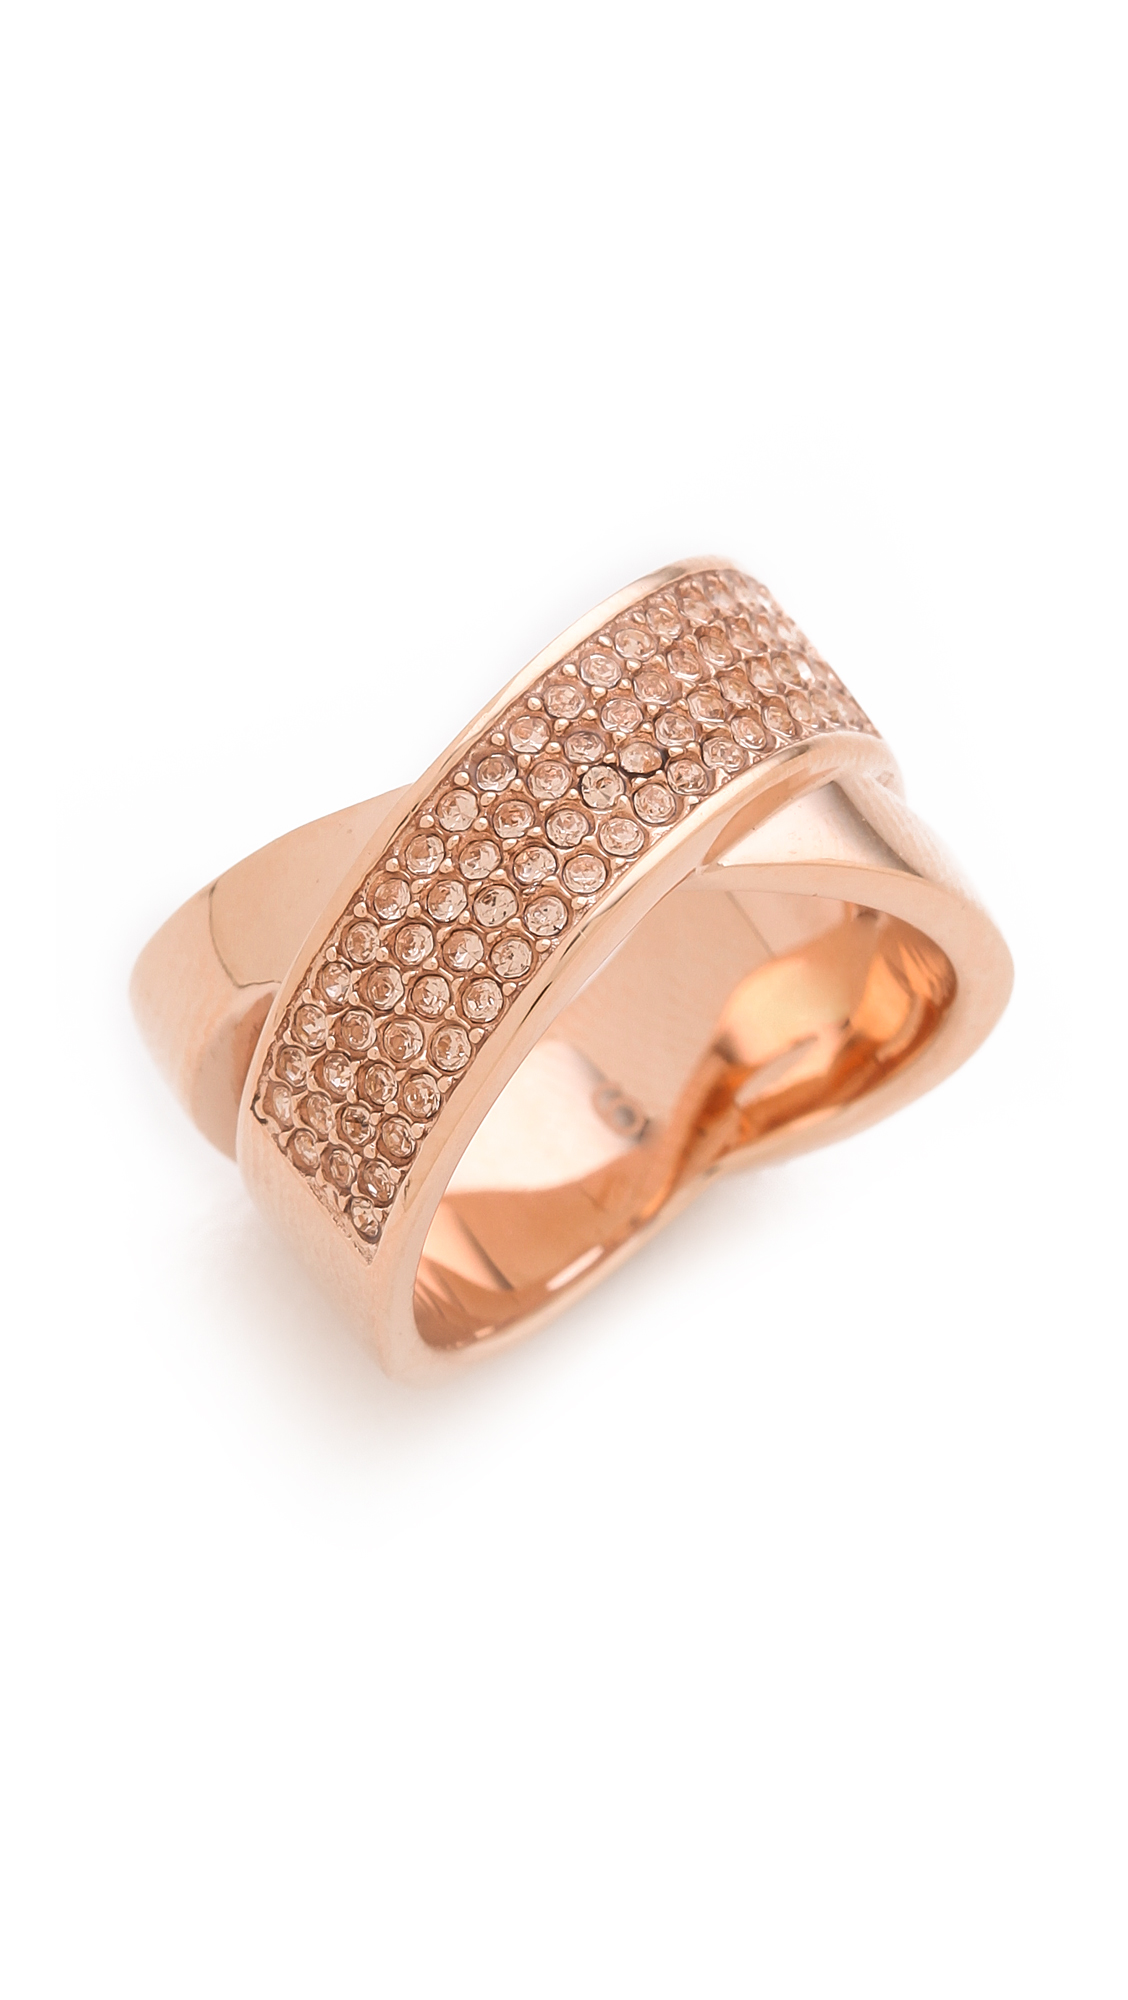 Michael Kors Pave Crisscross Ring in Gold (Rose Gold) | Lyst